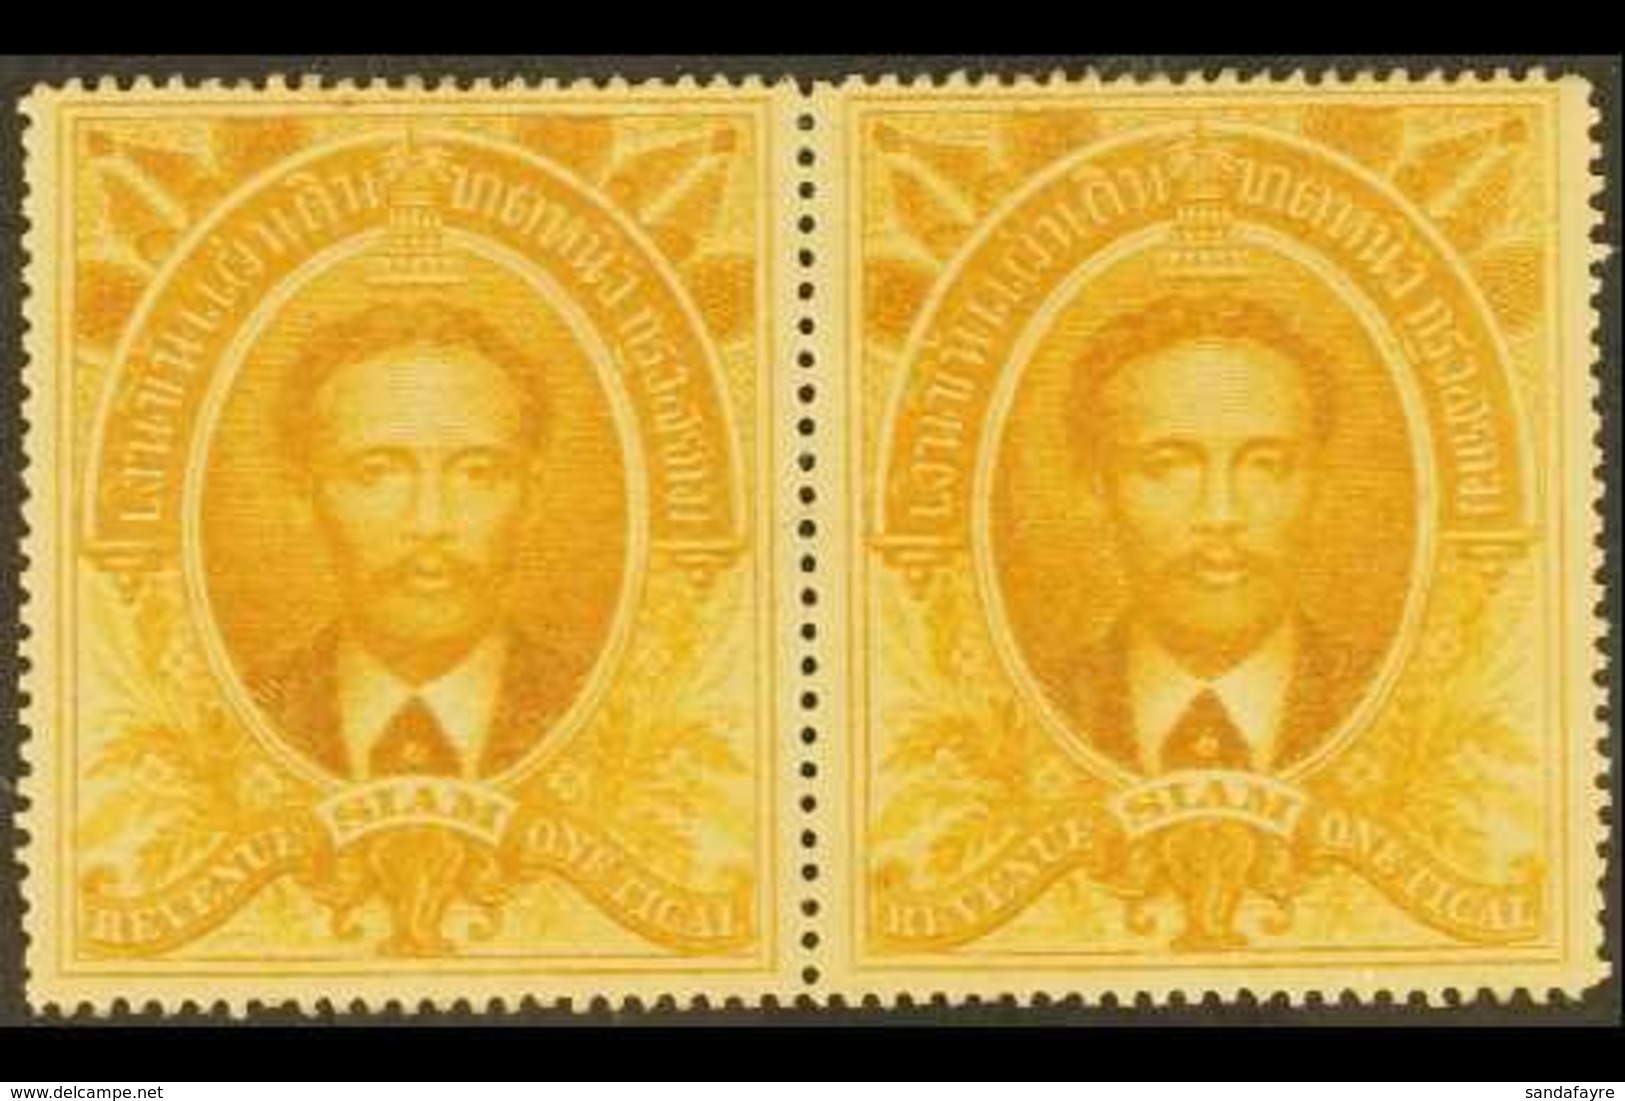 REVENUE STAMPS  1883 1t Yellow Ochre King Chulalonhkorn, BF 5, Very Fine Unused Pair. For More Images, Please Visit Http - Thaïlande